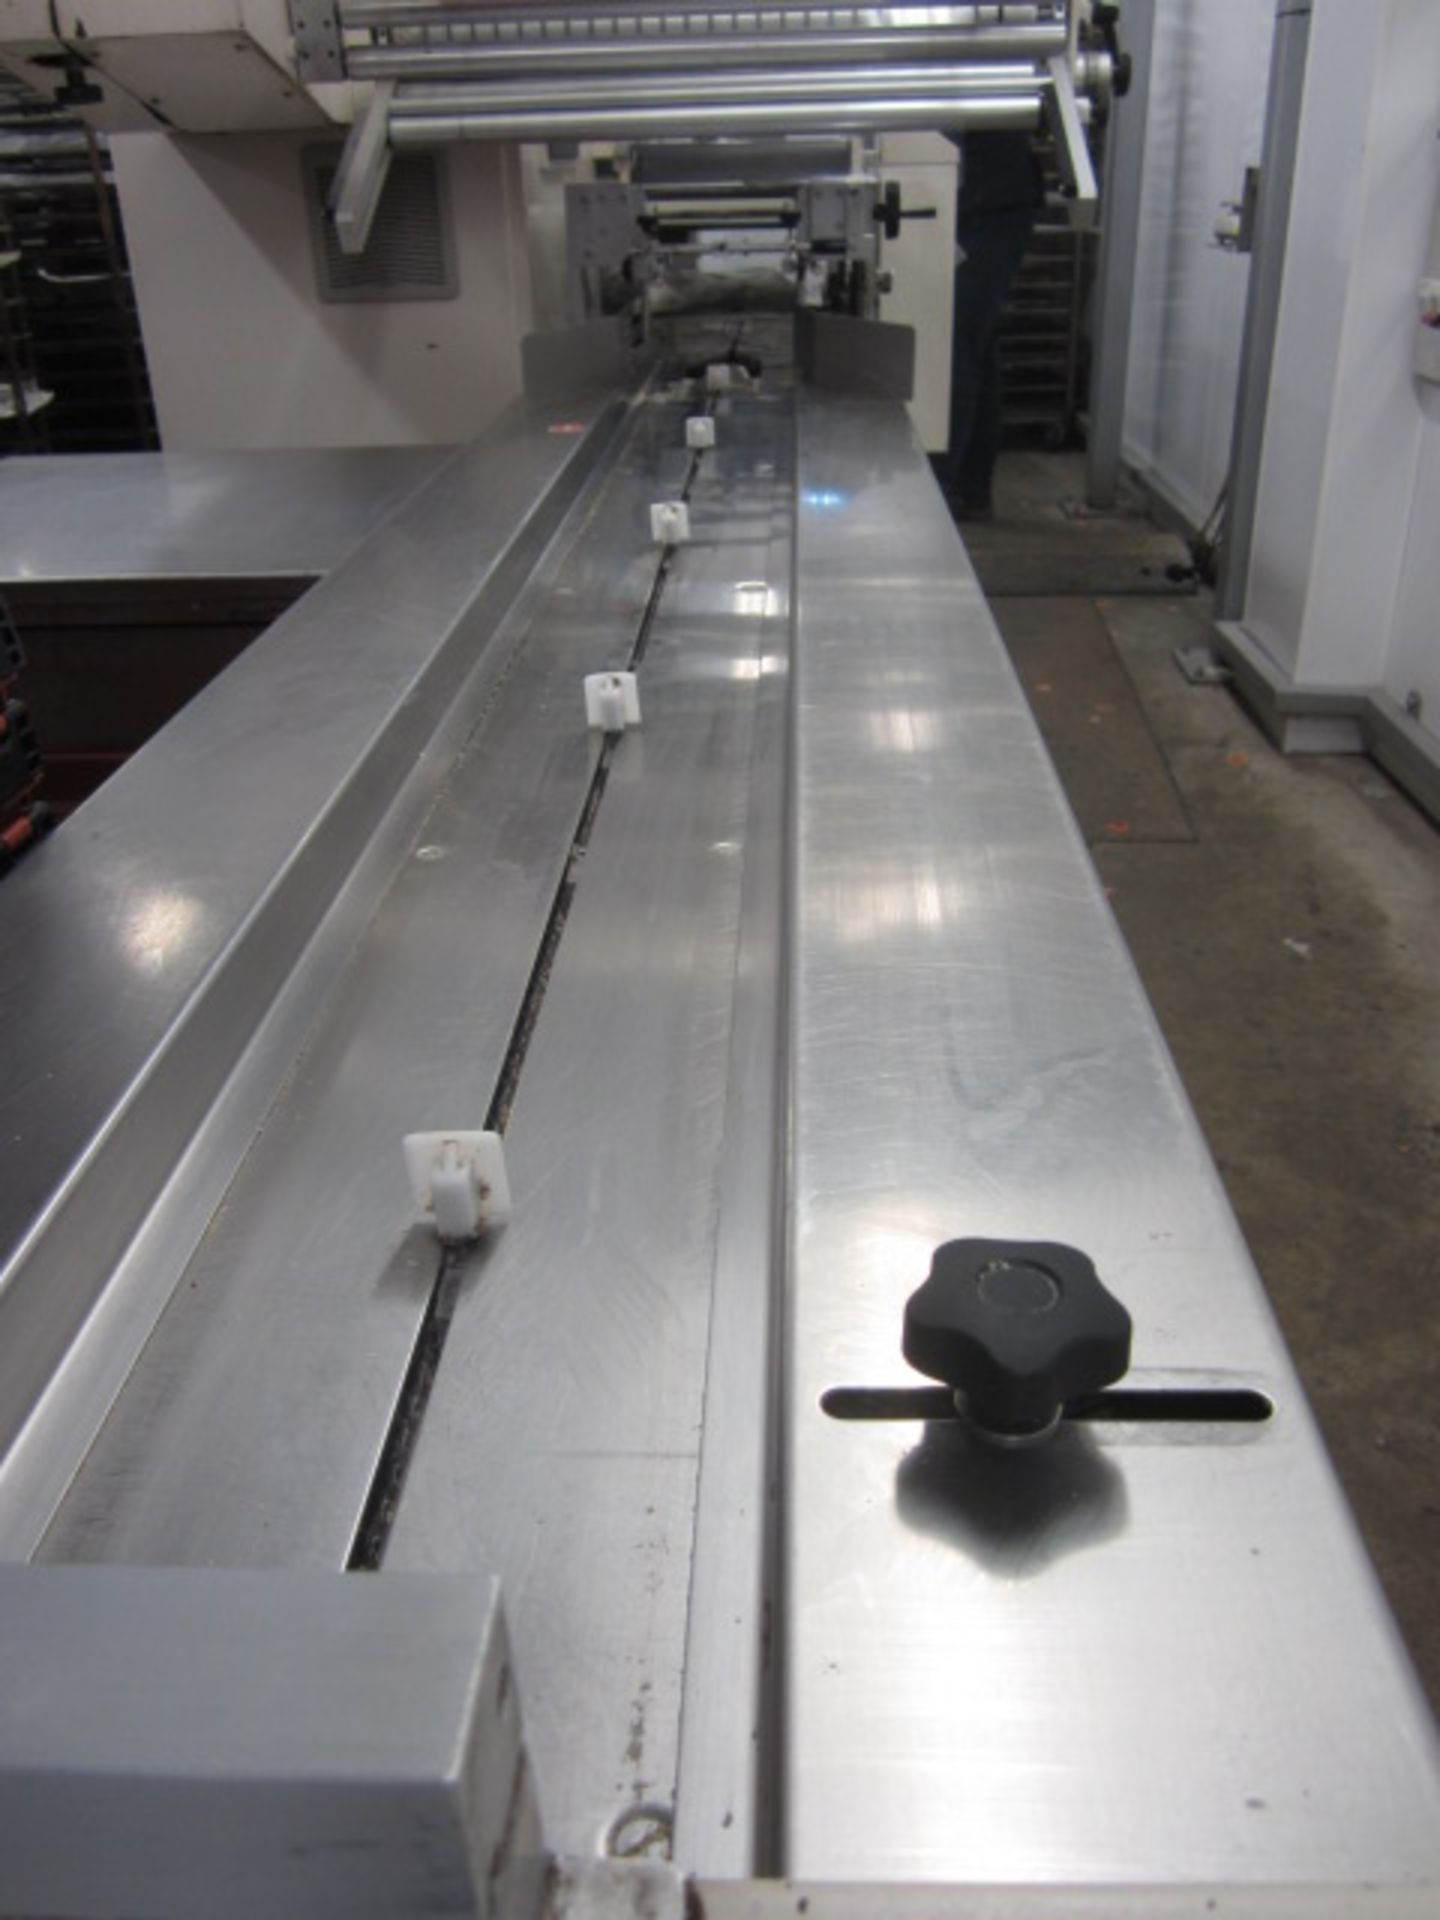 Ilapak Carrera 2000 PC flow wrapper, with stop/start and touch screen control s/n: 03 184 (2003) - Image 3 of 11